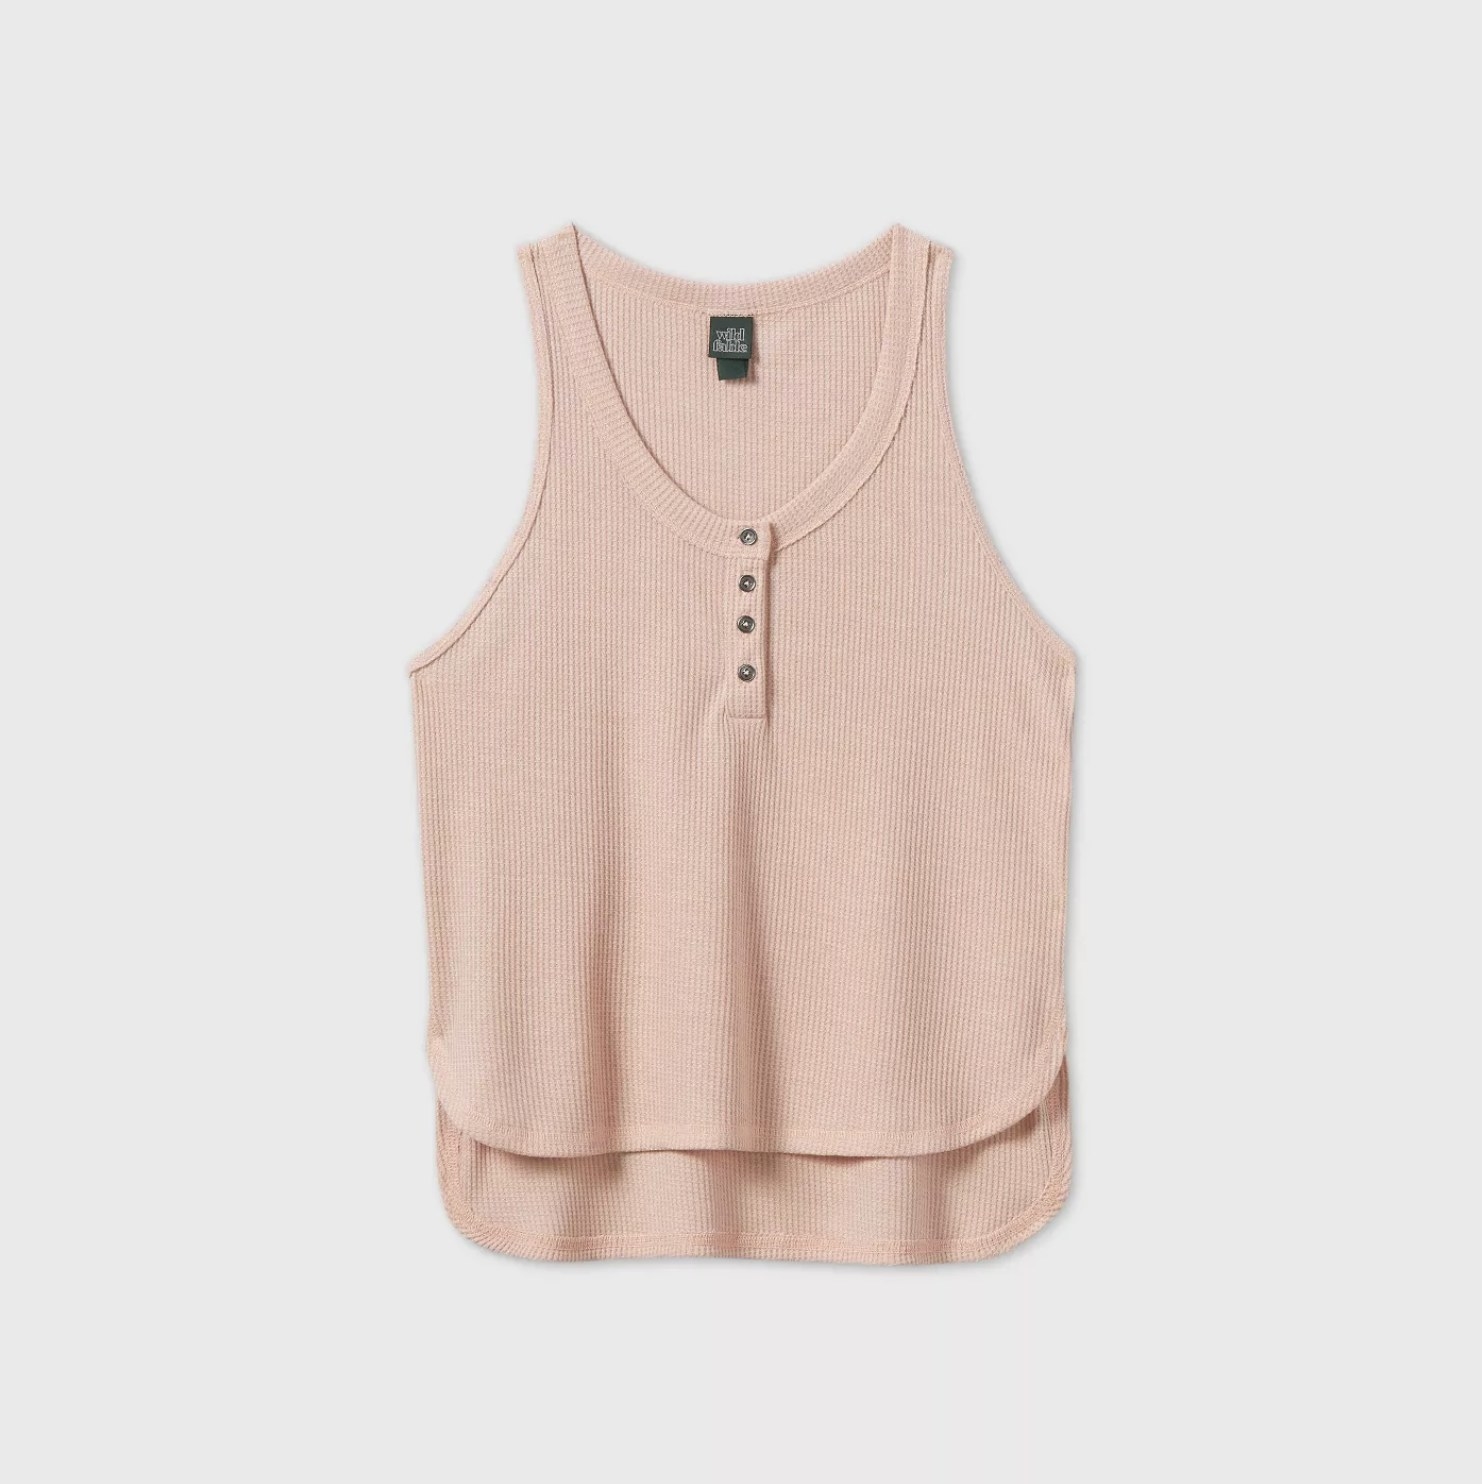 An image of a blush pink tank top with a button design on the neckline